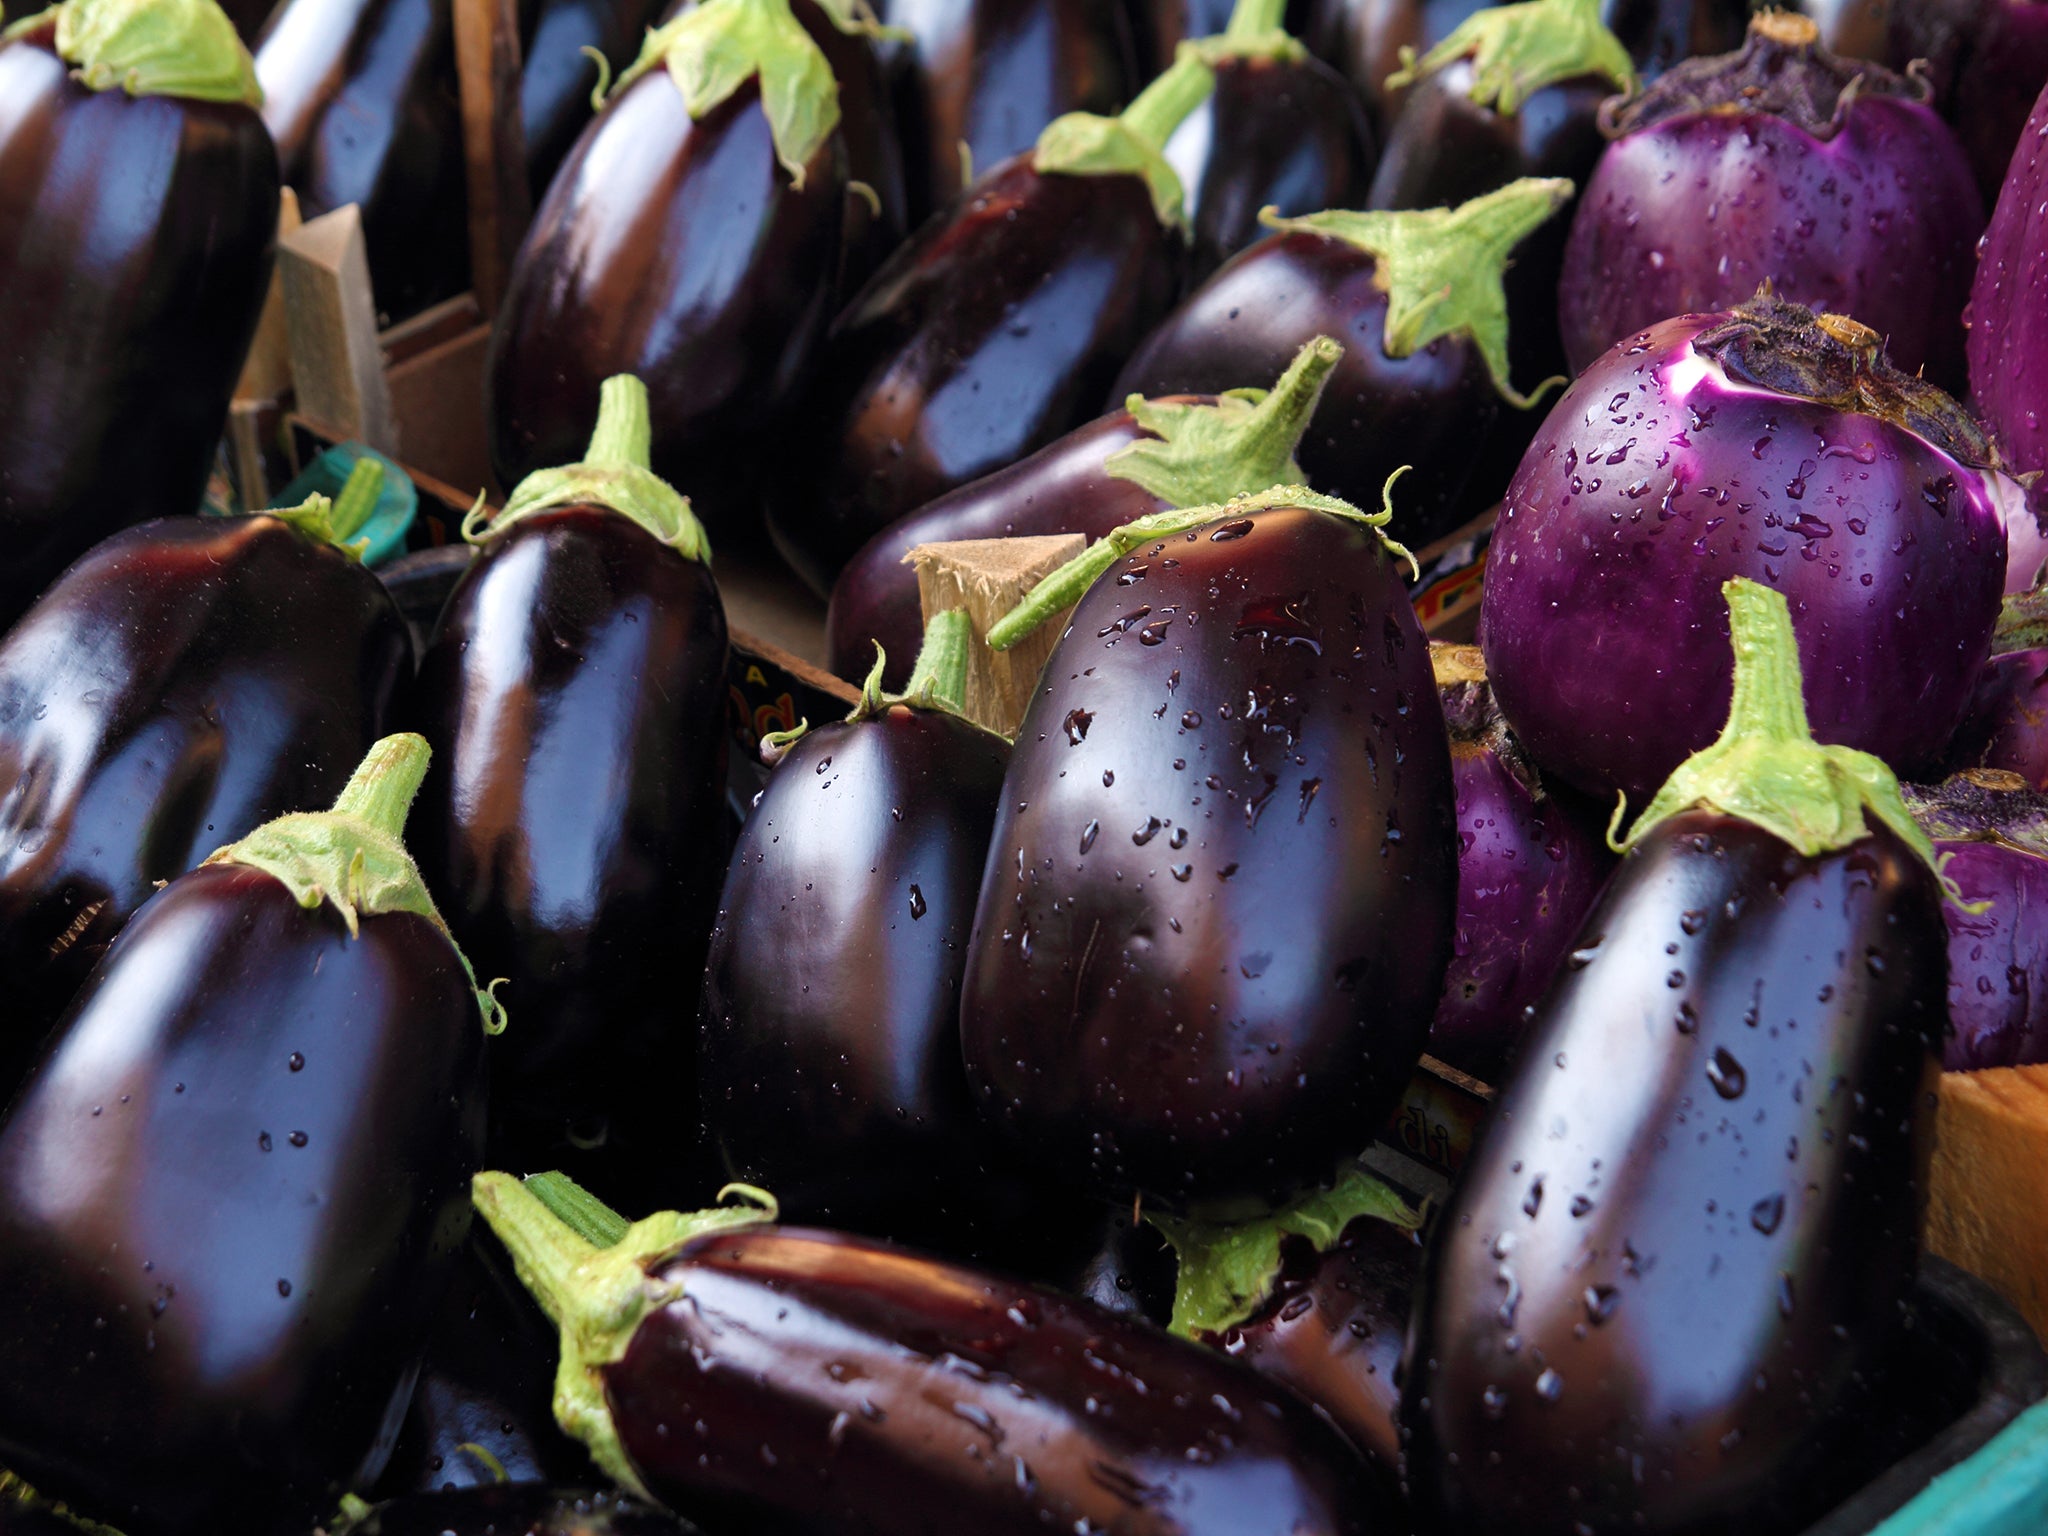 Salting cut aubergines before cooking can help reduce the amount of oil they absorb